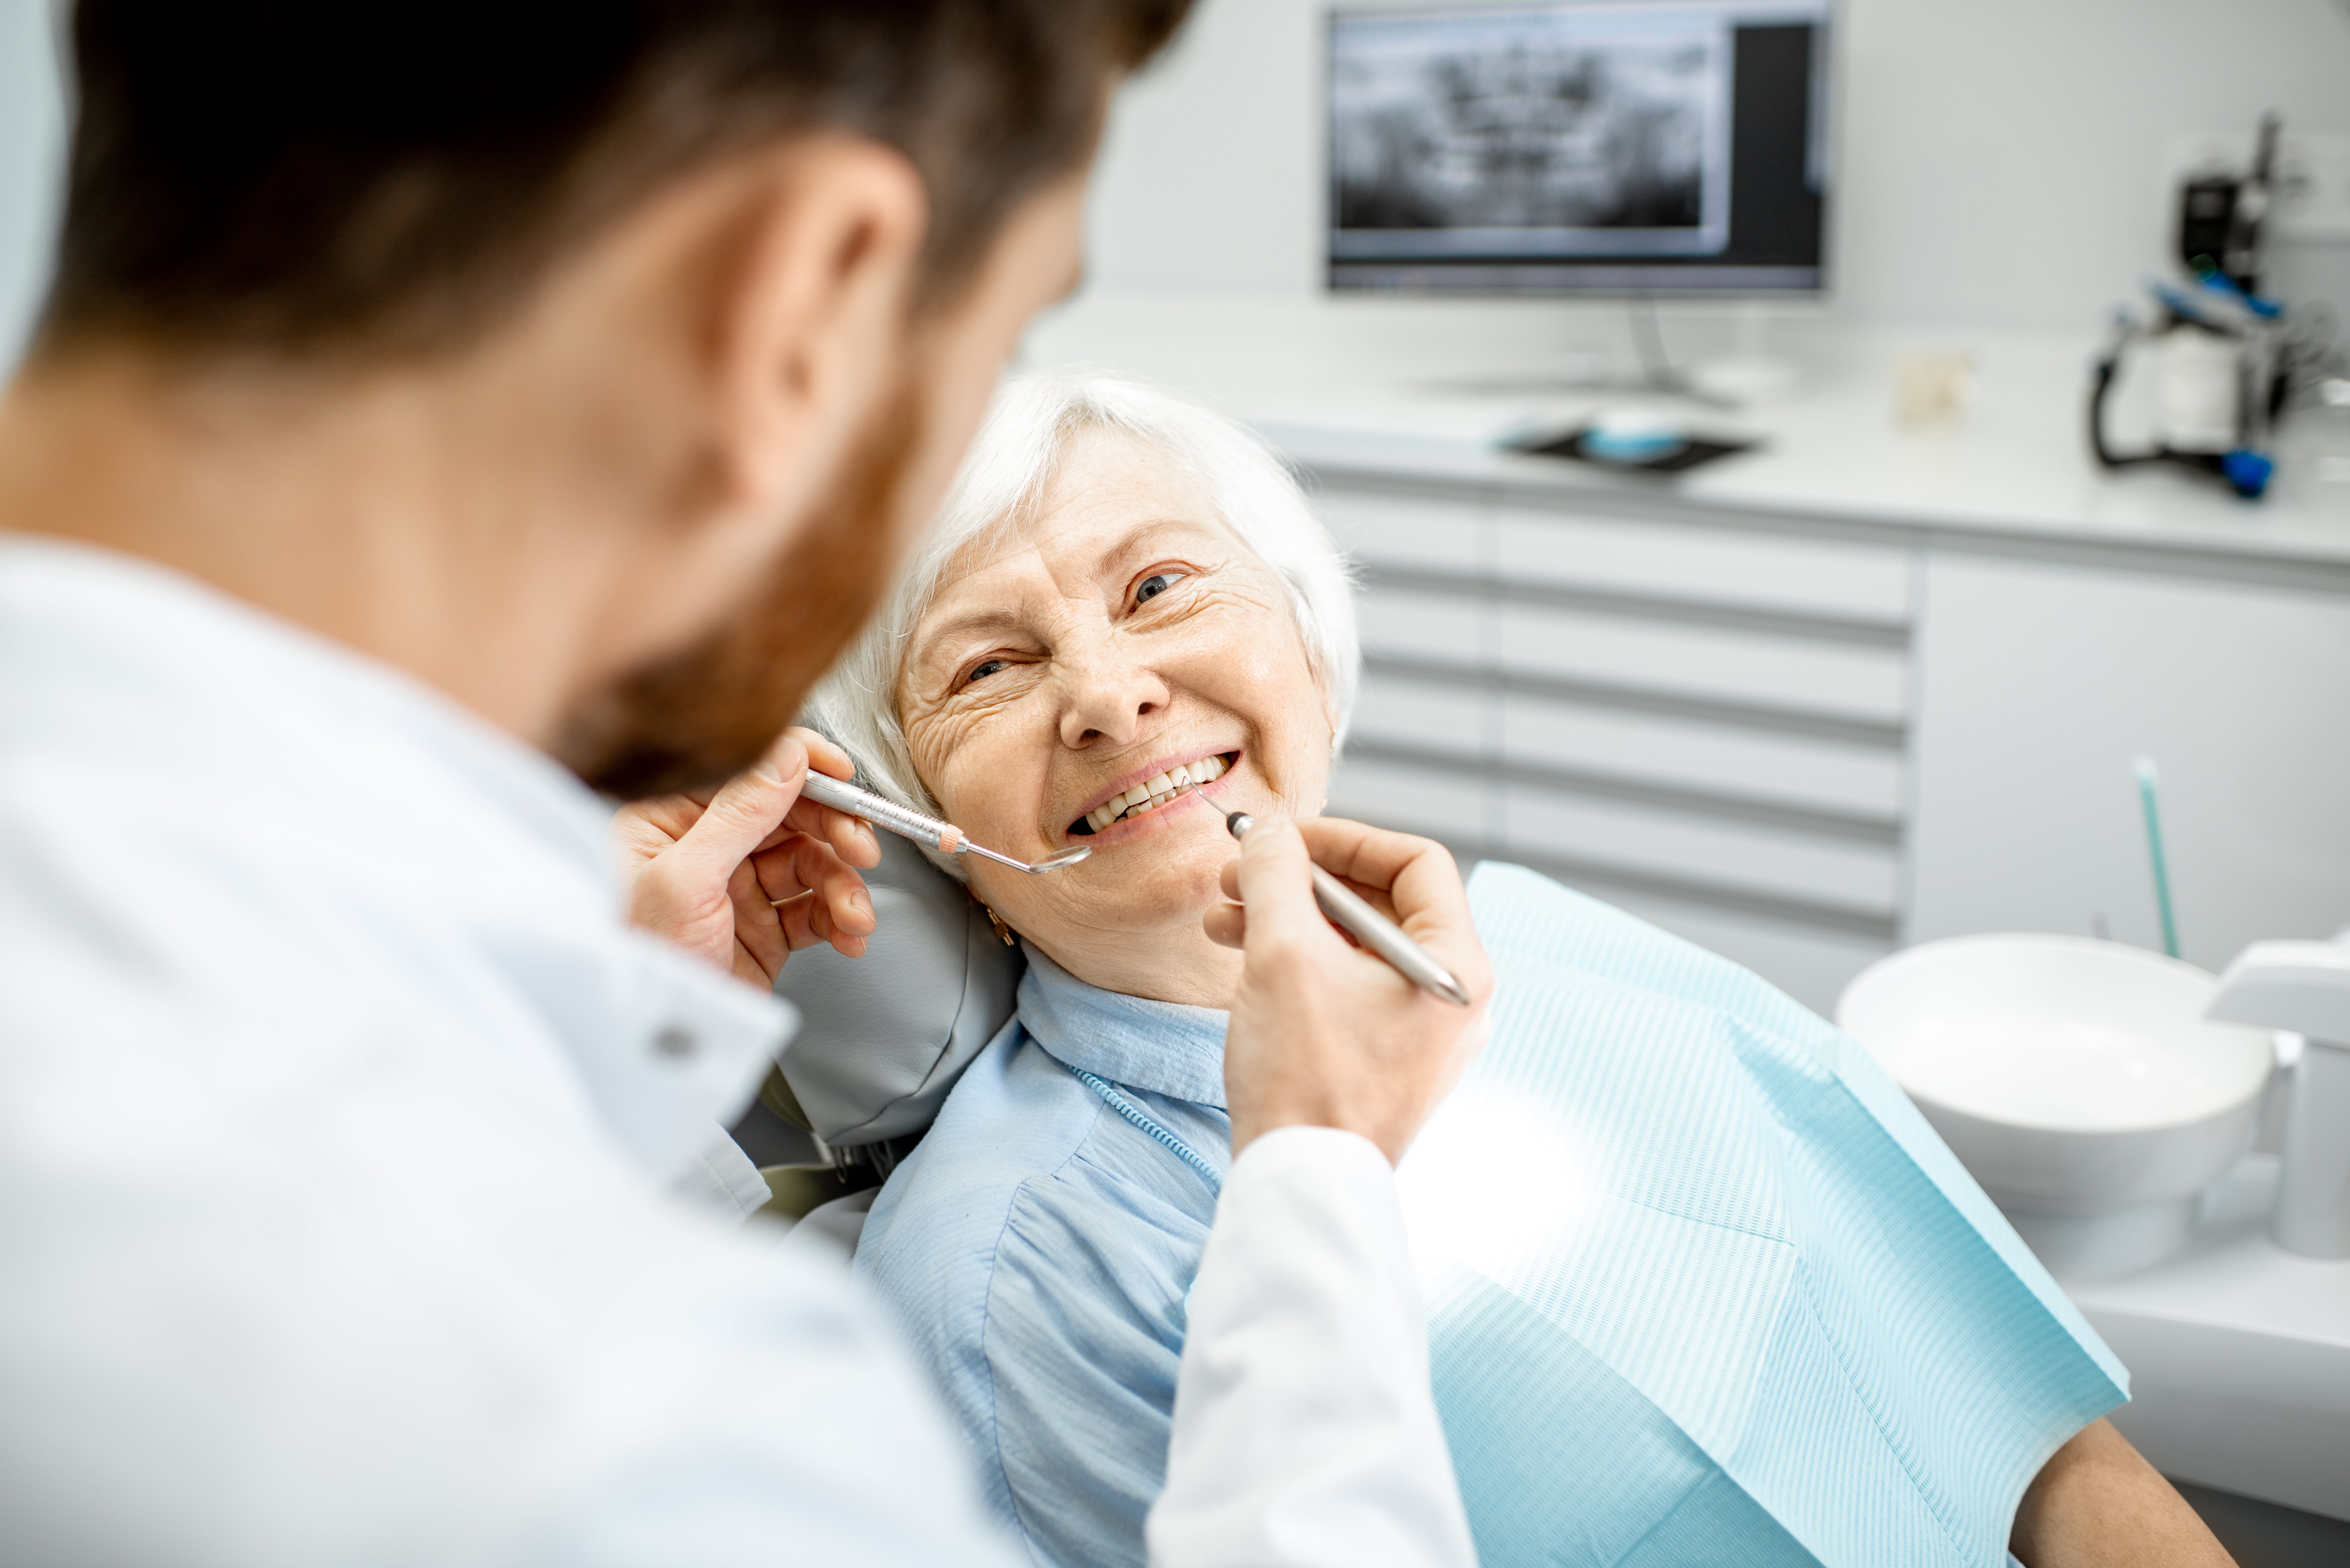 An older adult attending a dental appointment